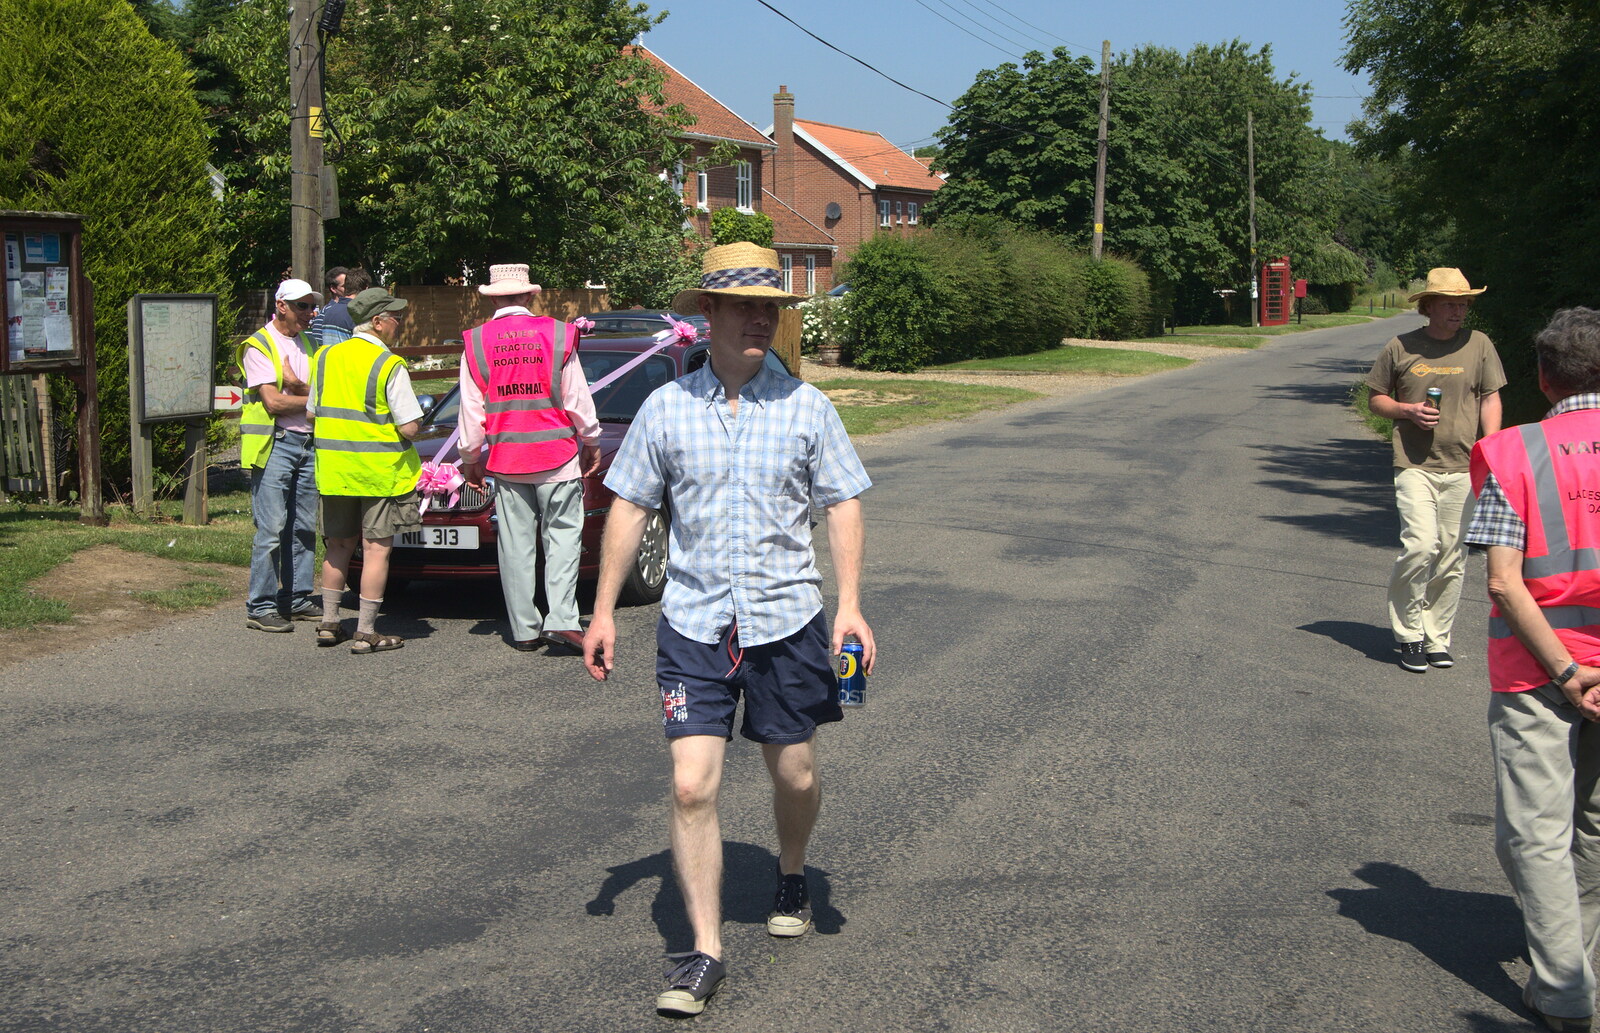 Mikey P strides down the road from The "Pink Ladies" Tractor Run and Barbeque, Thorpe Abbots, Norfolk - 7th July 2013